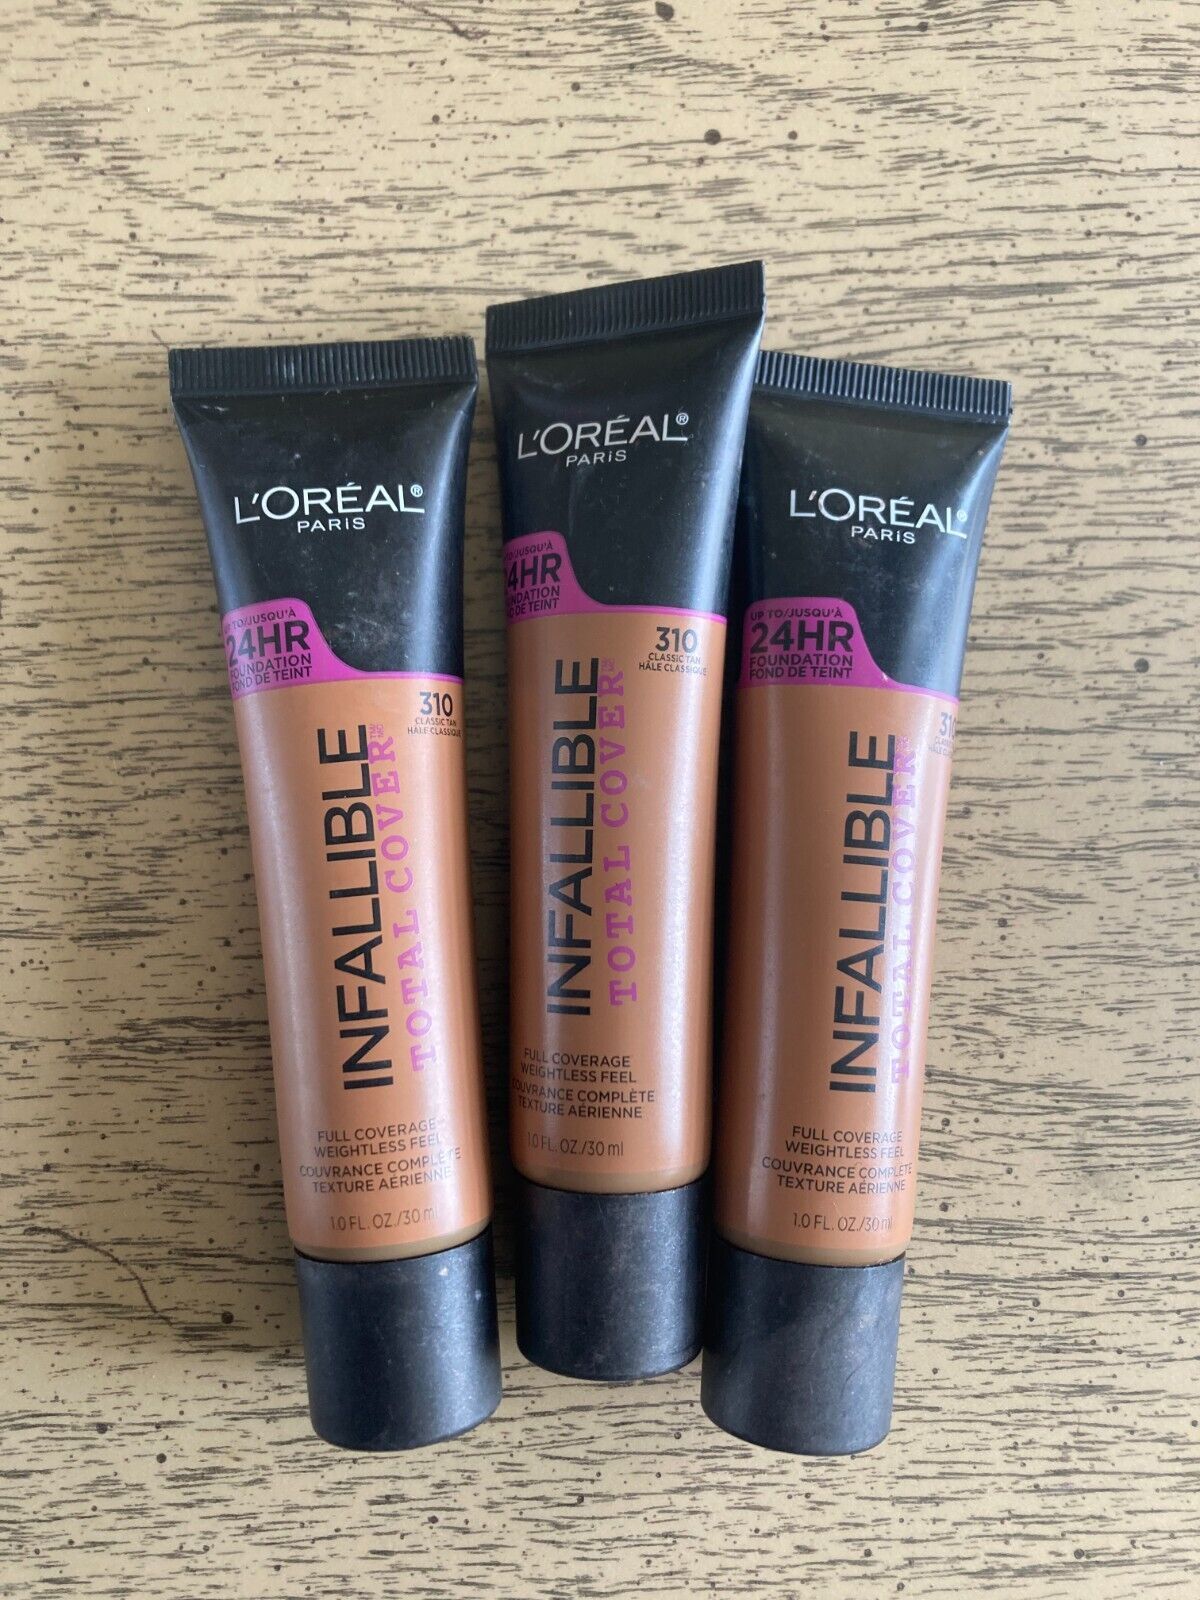 3 x L'Oreal Infallible Total Cover Foundation Shade: #310 Classic Tan Lot of 3 - $29.39